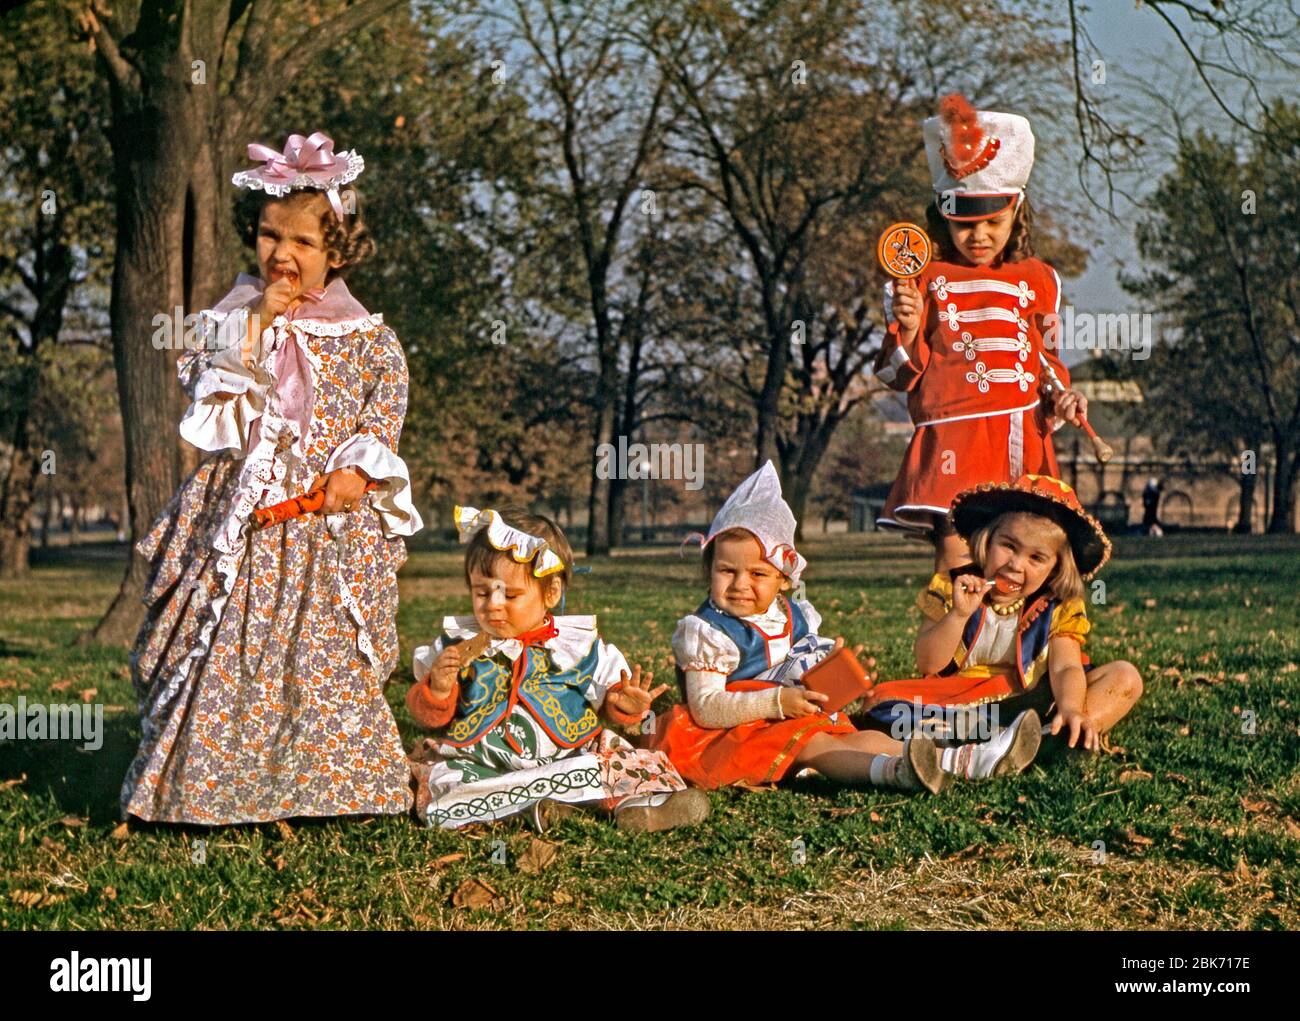 Five girls in a park in fancy dress costumes at Halloween, USA 1955. Three girls have orange popsicles (lollies) – two are licking them whilst the third (standing right in a marching-band uniform) holds hers up showing the image of a witch on it. Stock Photo